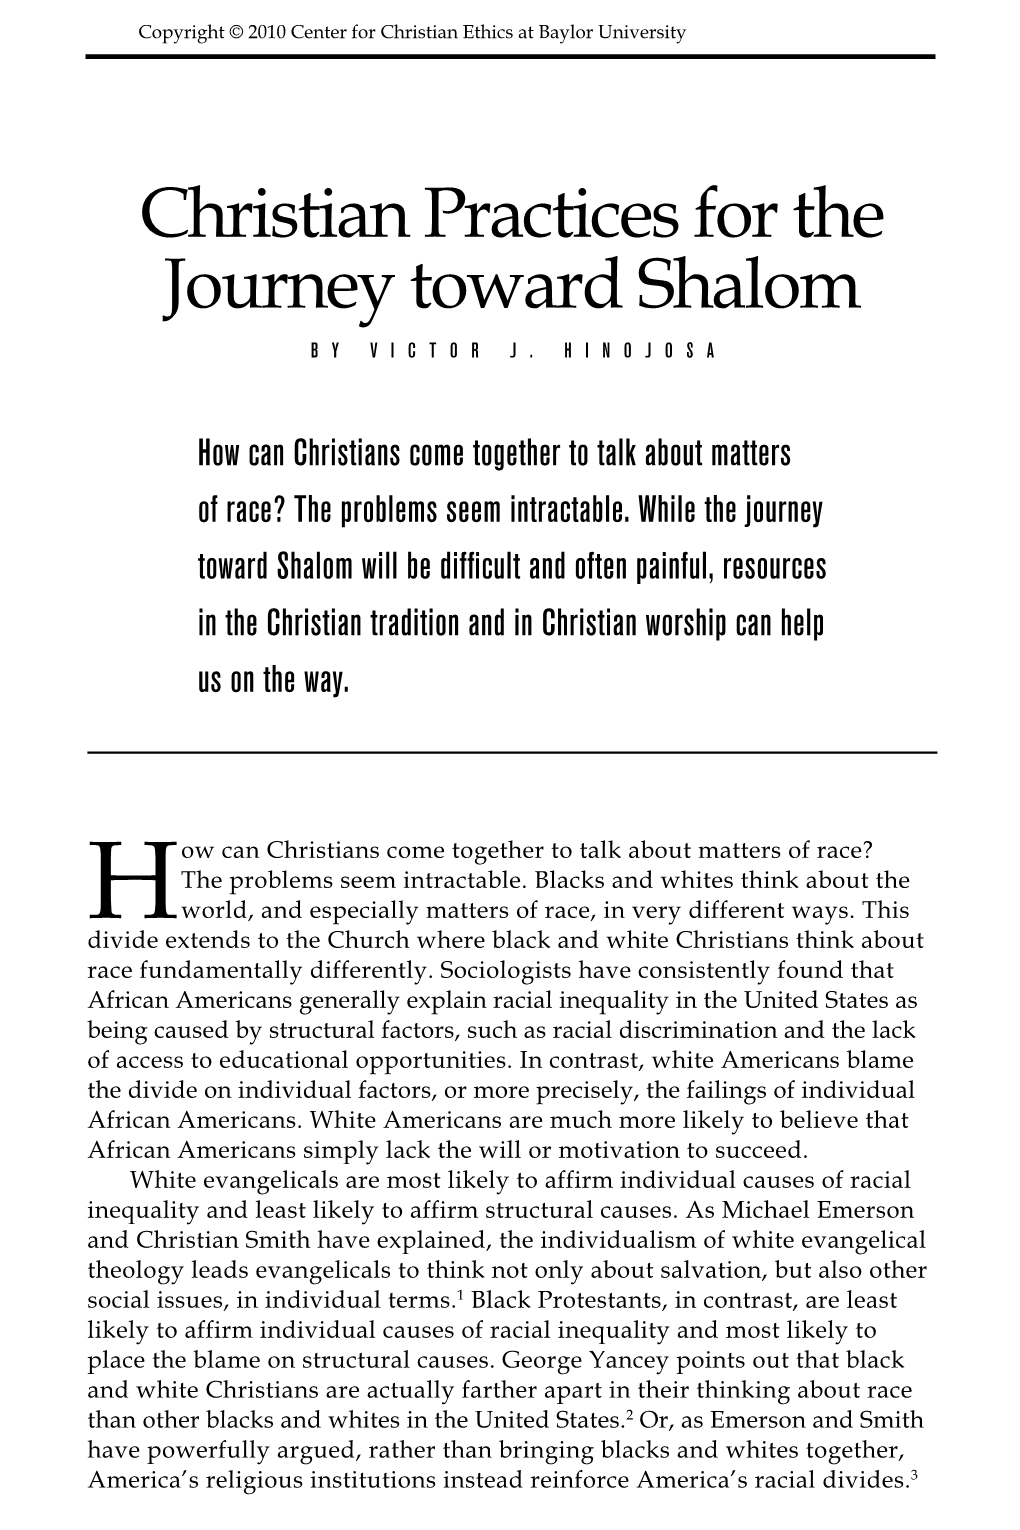 Christian Practices for the Journey Toward Shalom by Victor J